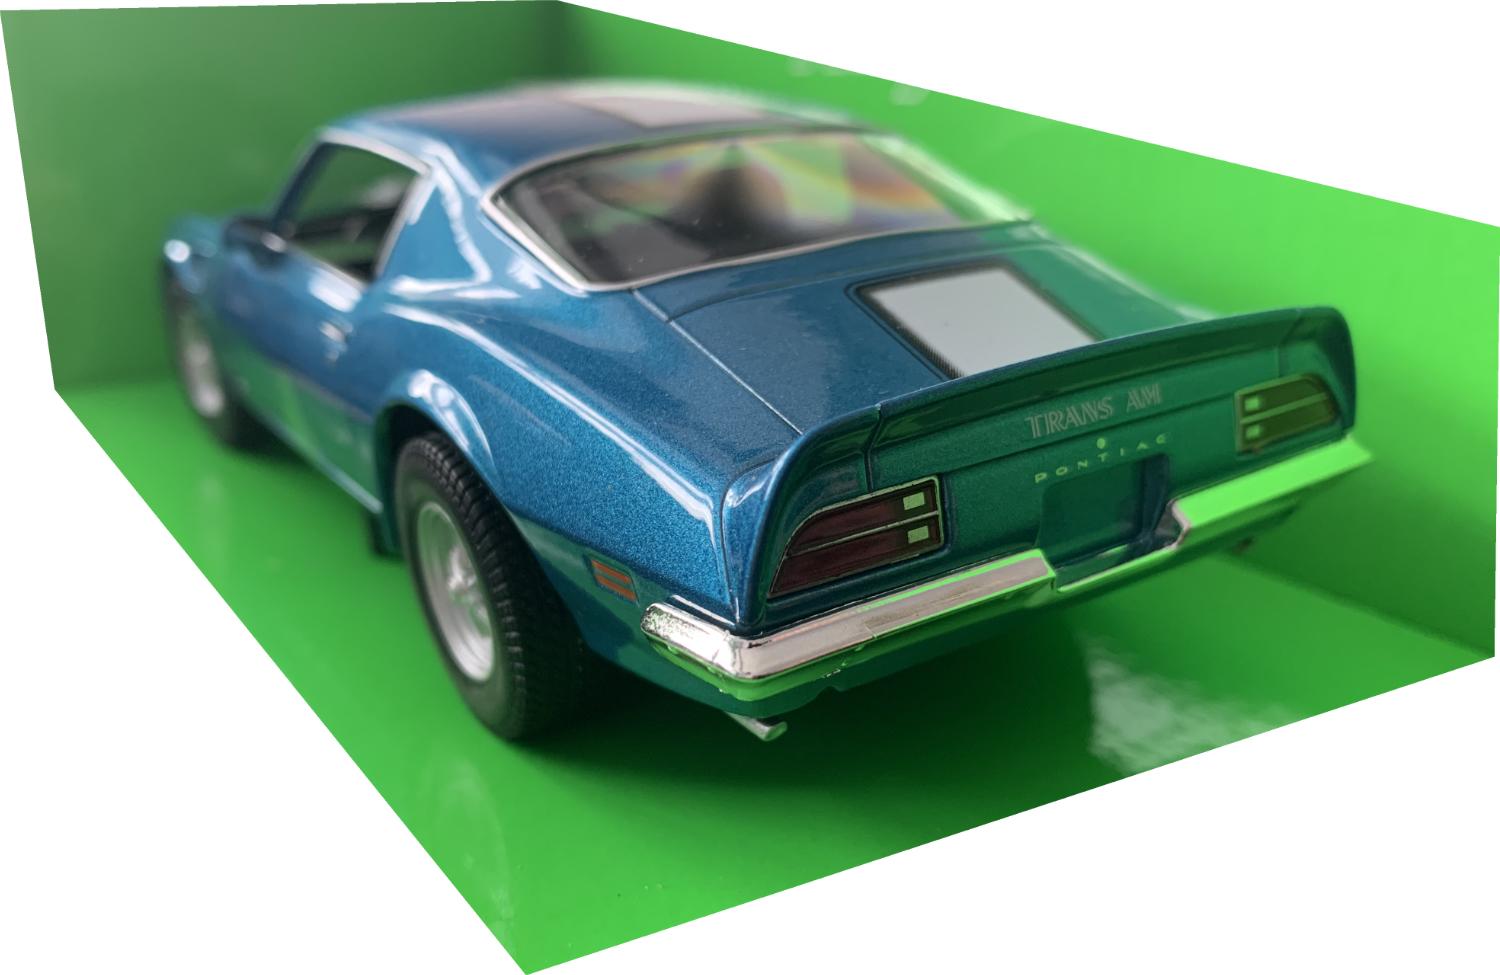 The model is mounted on a removable plinth and presented in a window display box, the car is approx. 19 cm long and the presentation box is 23 cm long